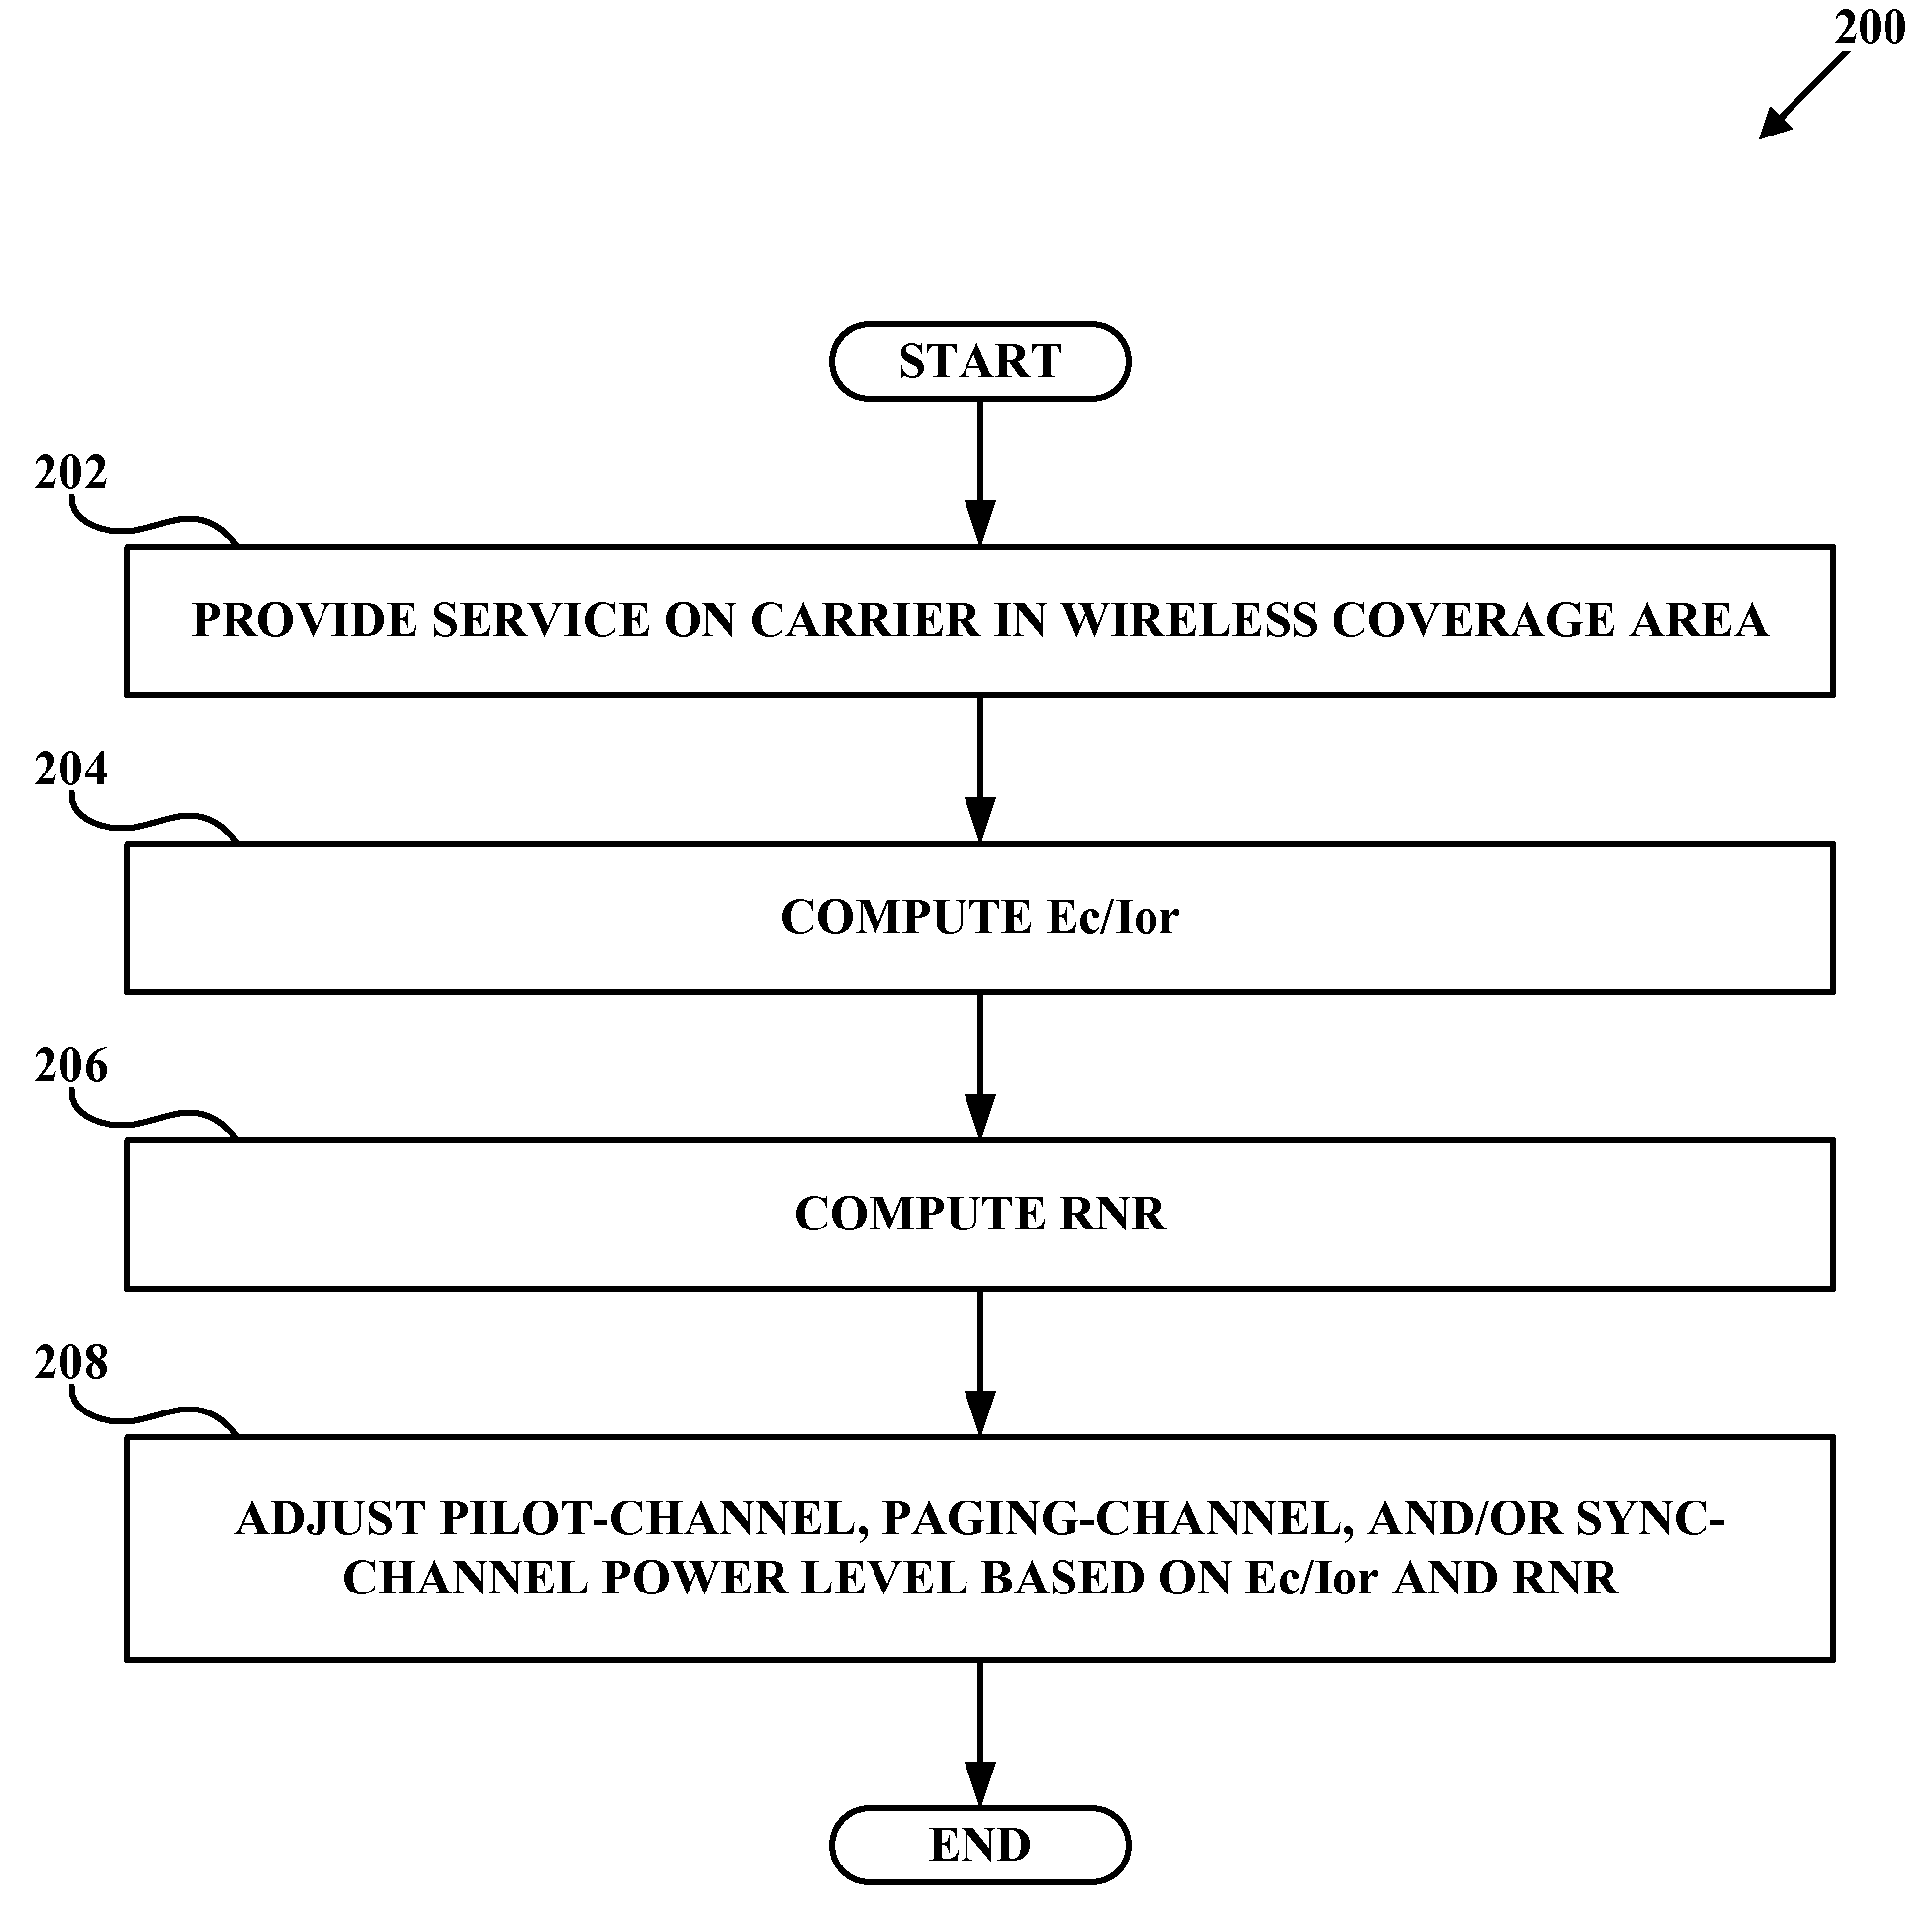 Dynamic Adjustment of the pilot-channel, paging-channel, and sync-channel transmission-power levels based on forward-link and reverse-link RF conditions